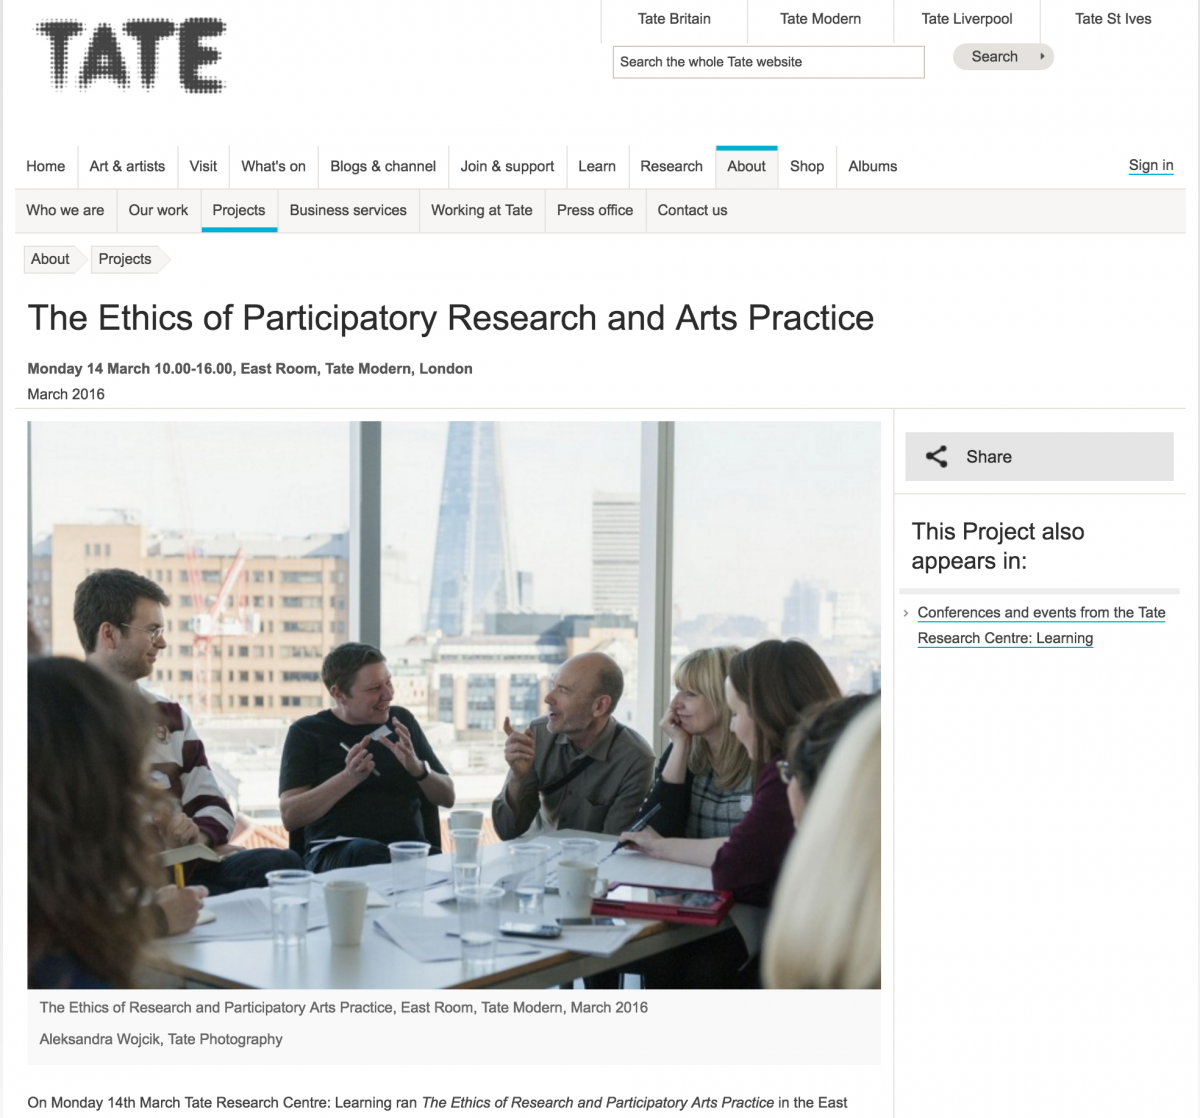 The Ethics of Participatory Research and Arts Practice,        Tate Research Centre: Learning, at the Tate Modern